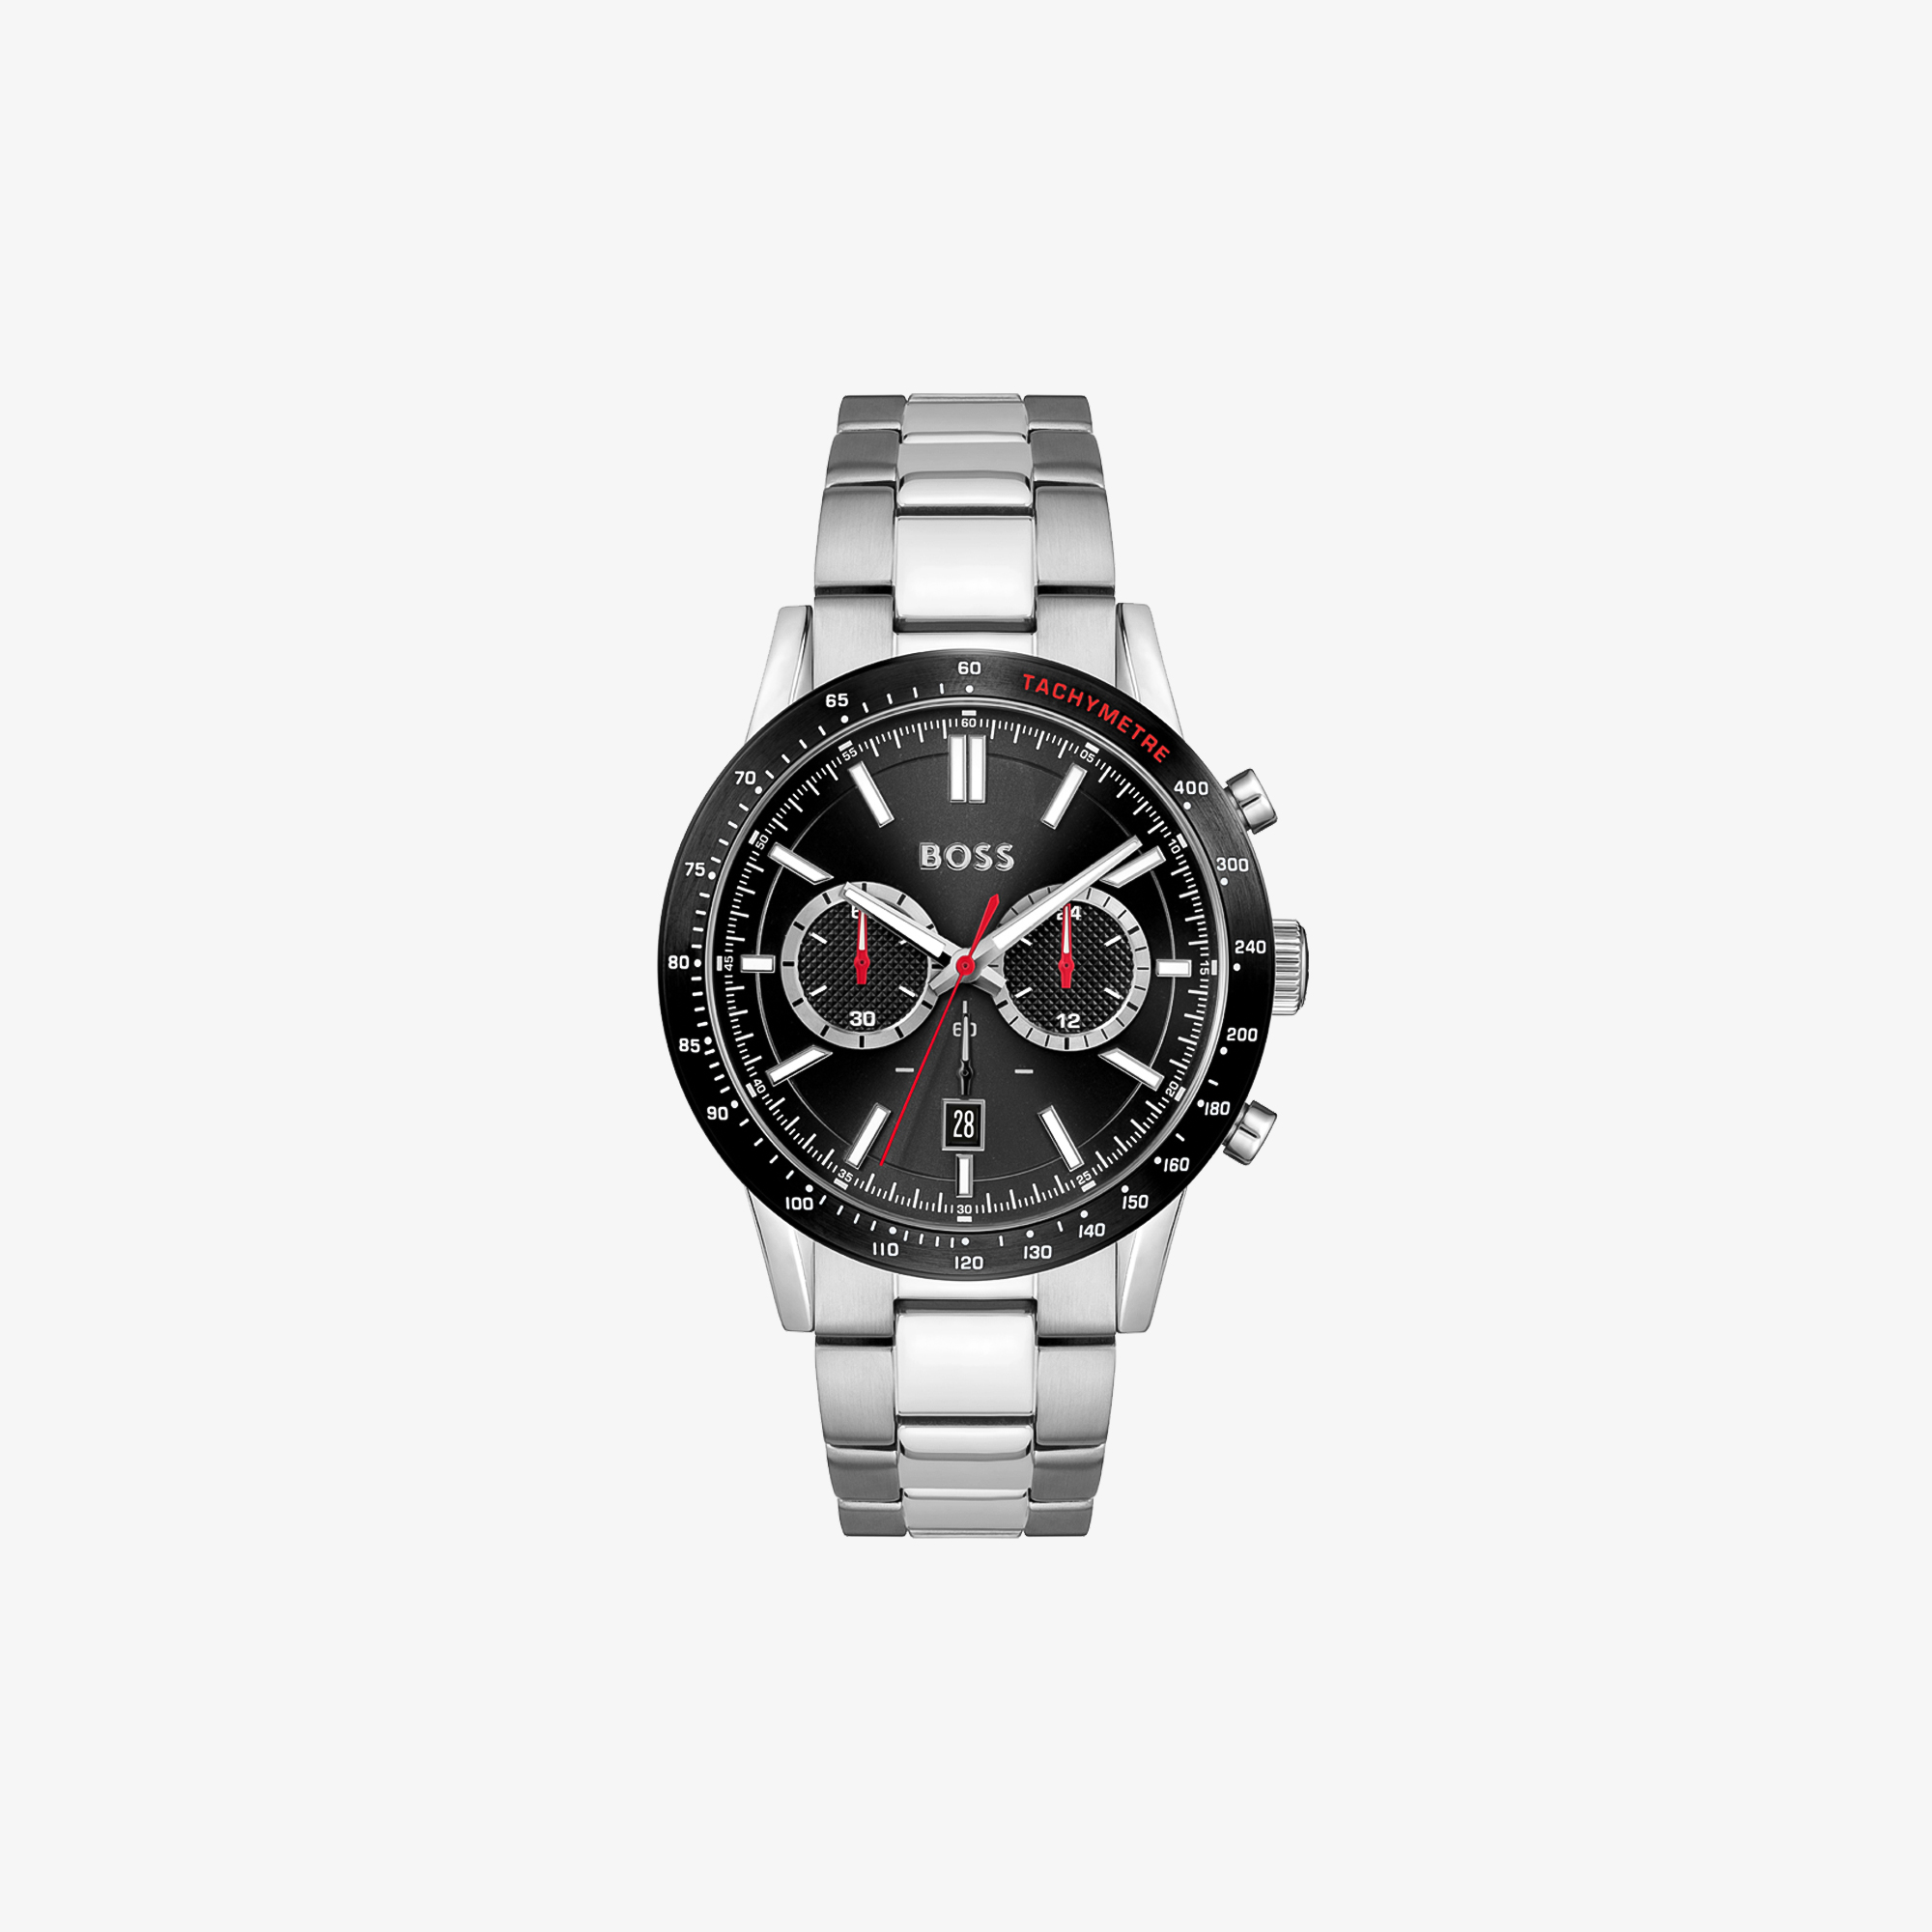 HUGO BOSS ALLURE CHRONOGRAPH WITH BLACK DIAL